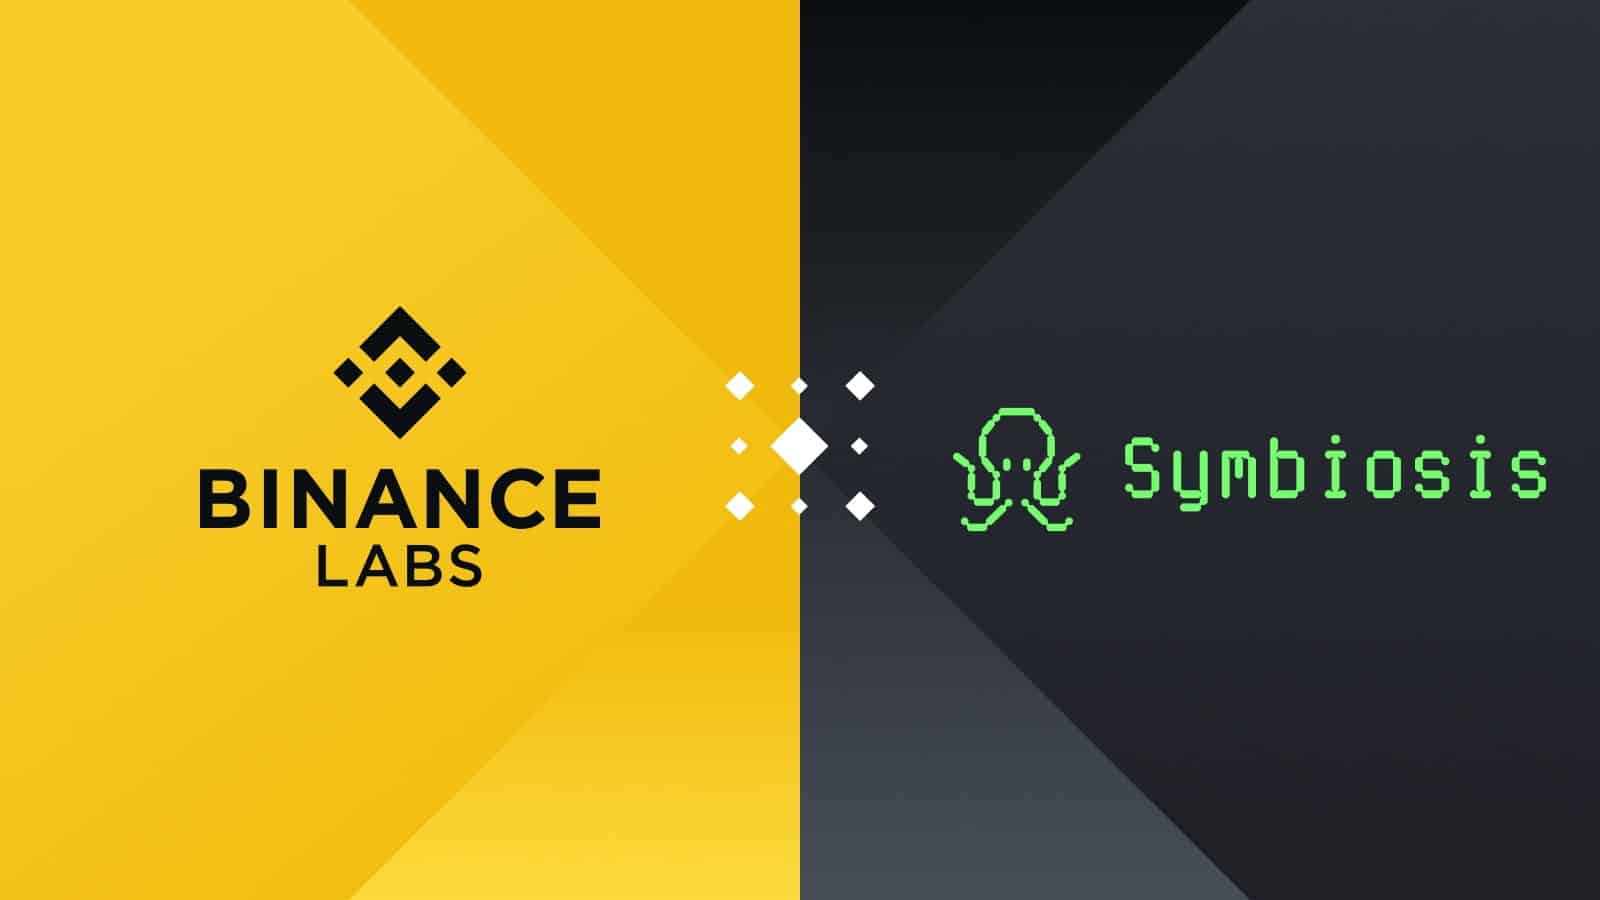 Binance Labs and Symbiosis Finance have entered into a strategic partnership